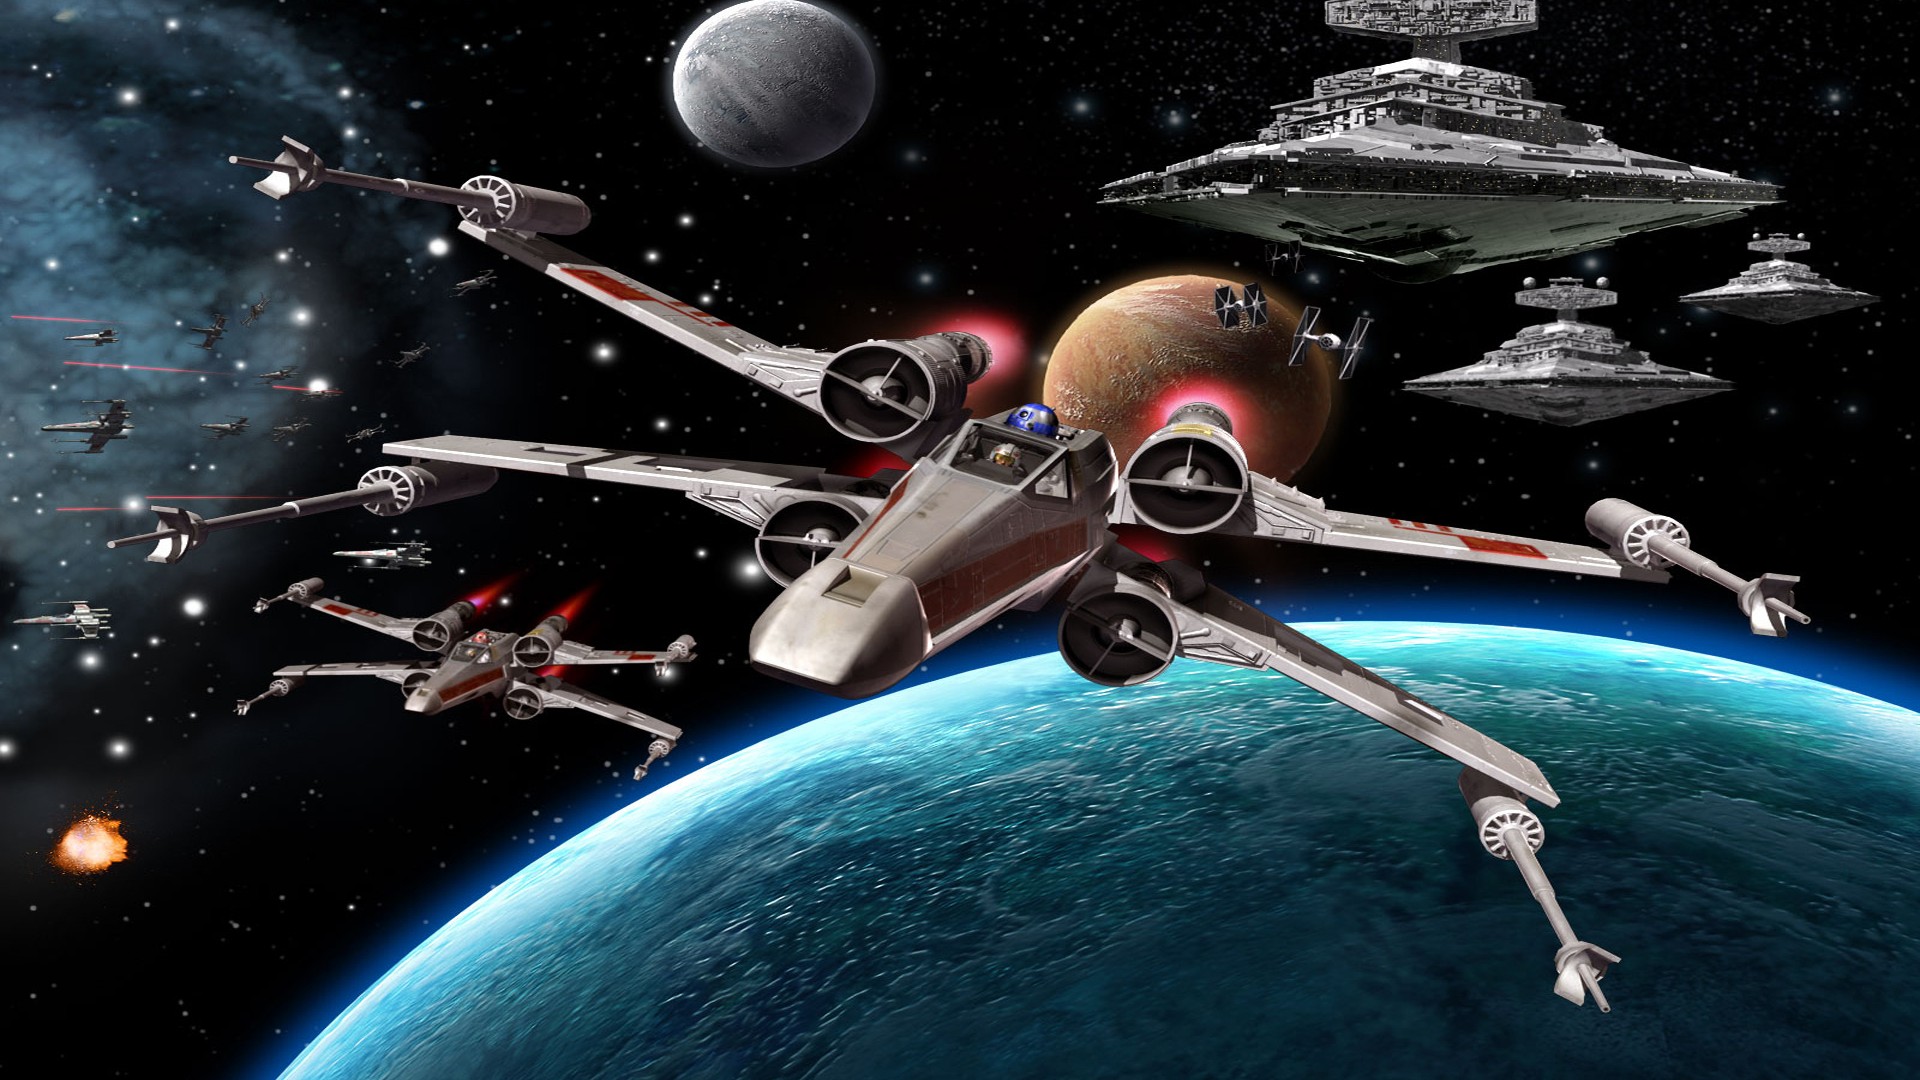 star wars wallpaper hd,outer space,spacecraft,space station,space,aerospace engineering